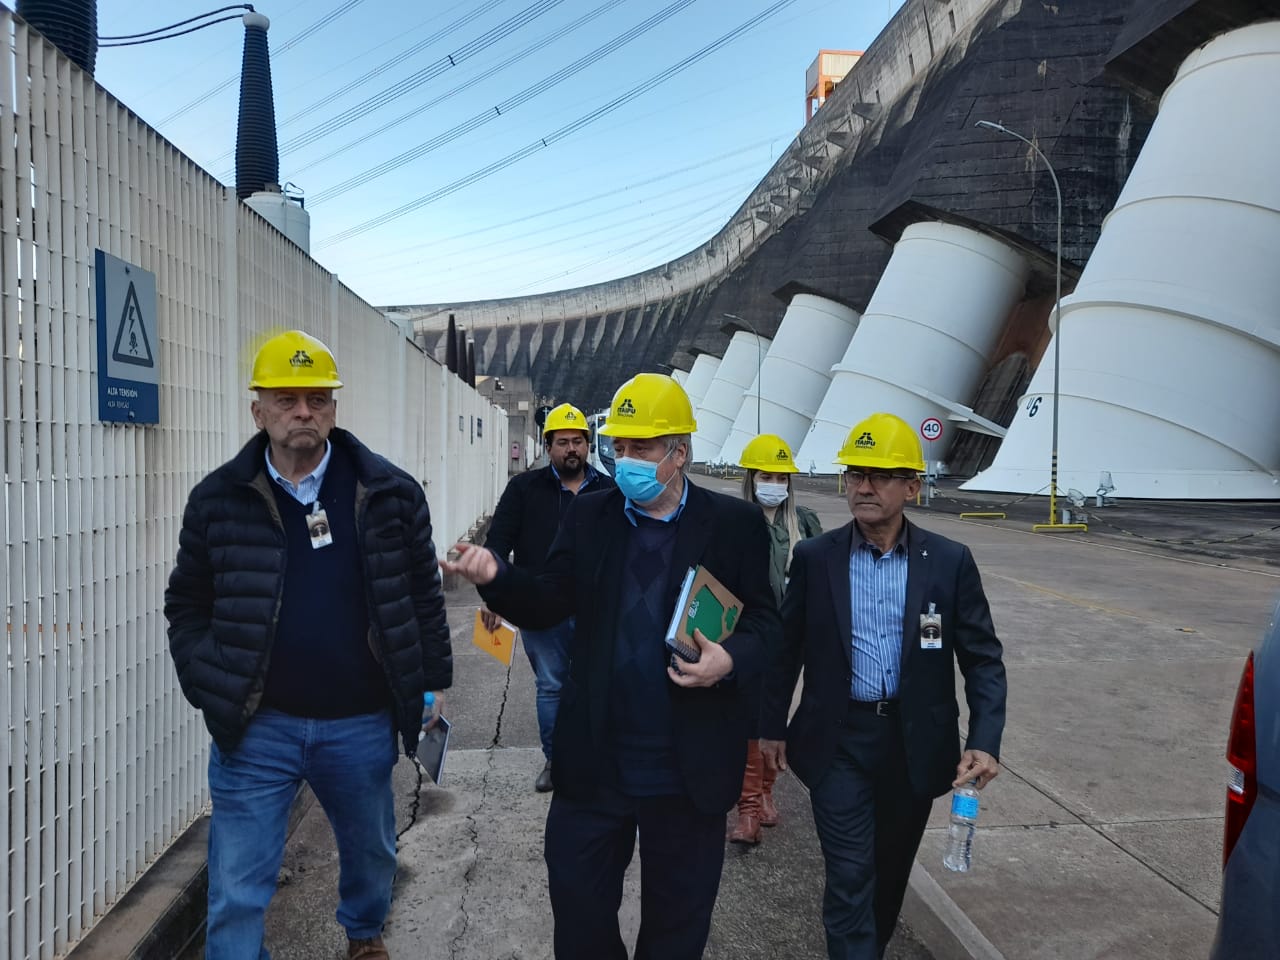 Parlasurians observed works of the Itaipu hydroelectric plant